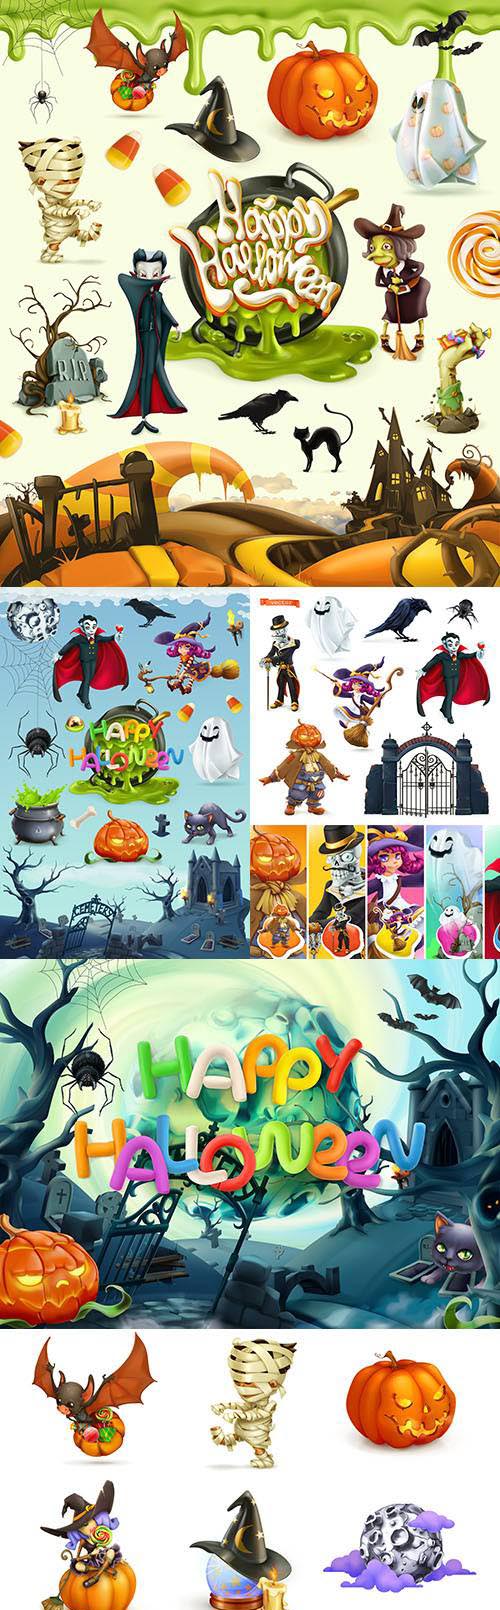 Happy Halloween and cartoon heroes 3rd realistic illustrations